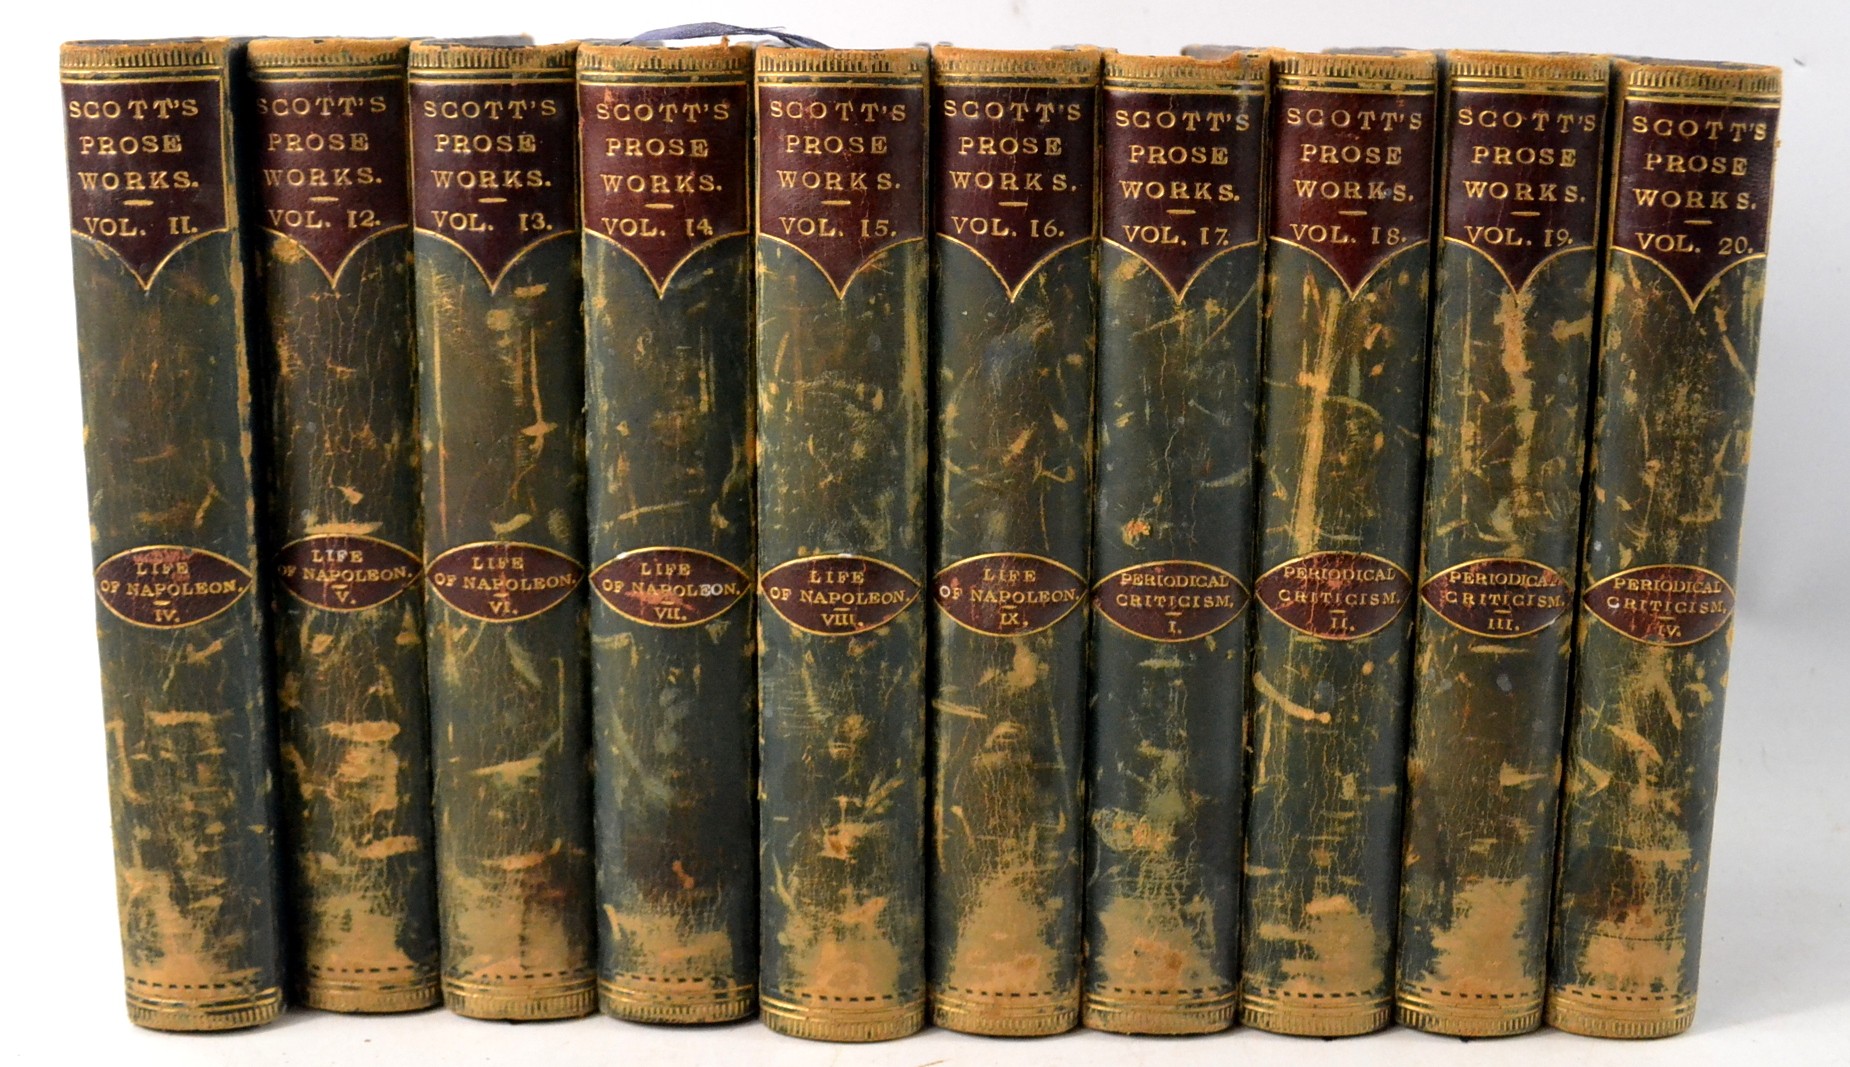 RARE Miscellaneous prose works by Sir Walter Scott (30 volumes) - Image 10 of 13